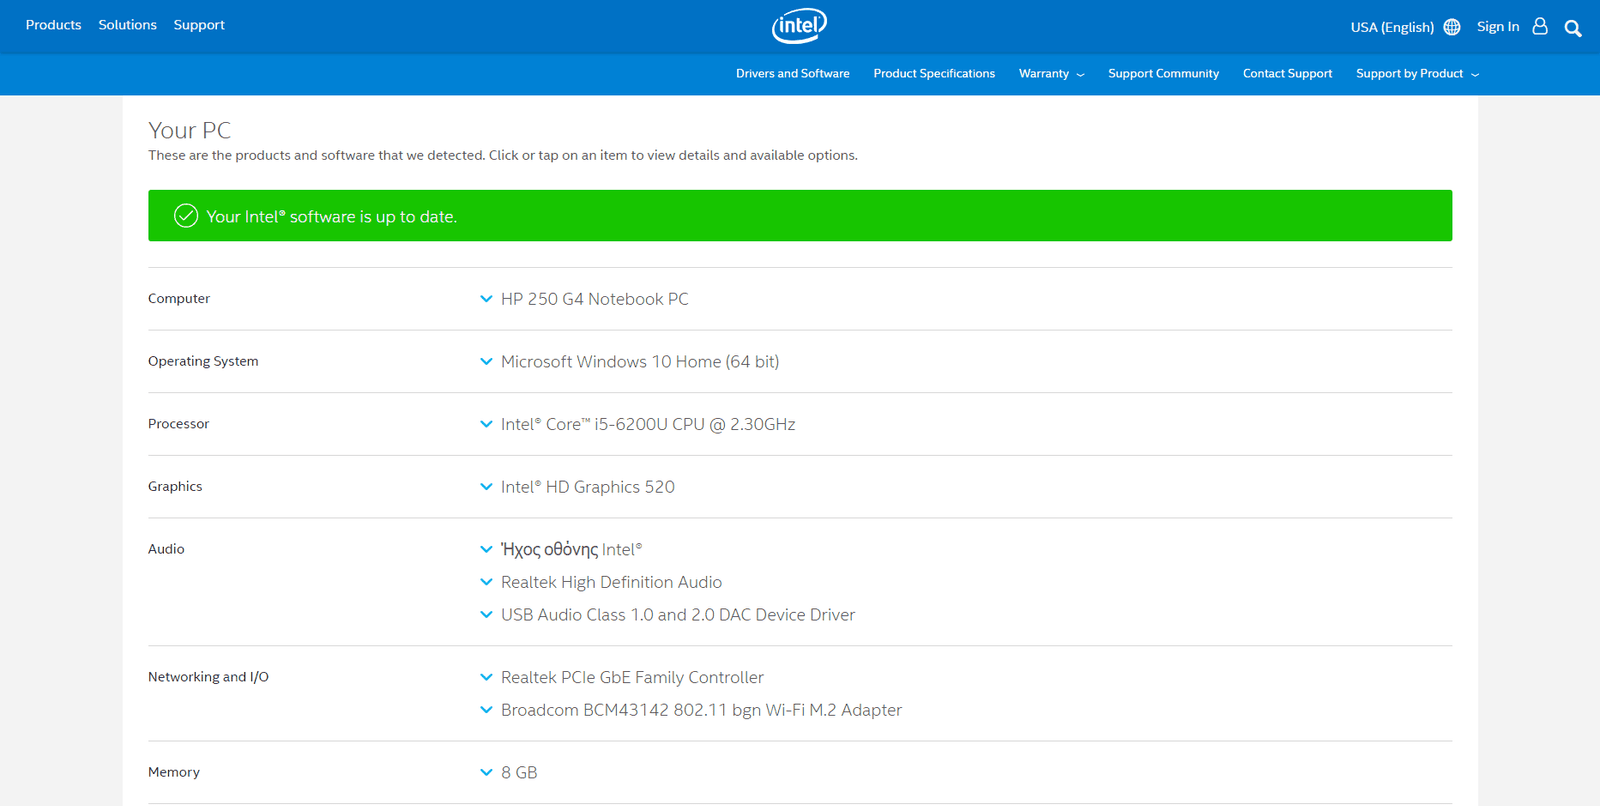 intel driver and support assistant popup